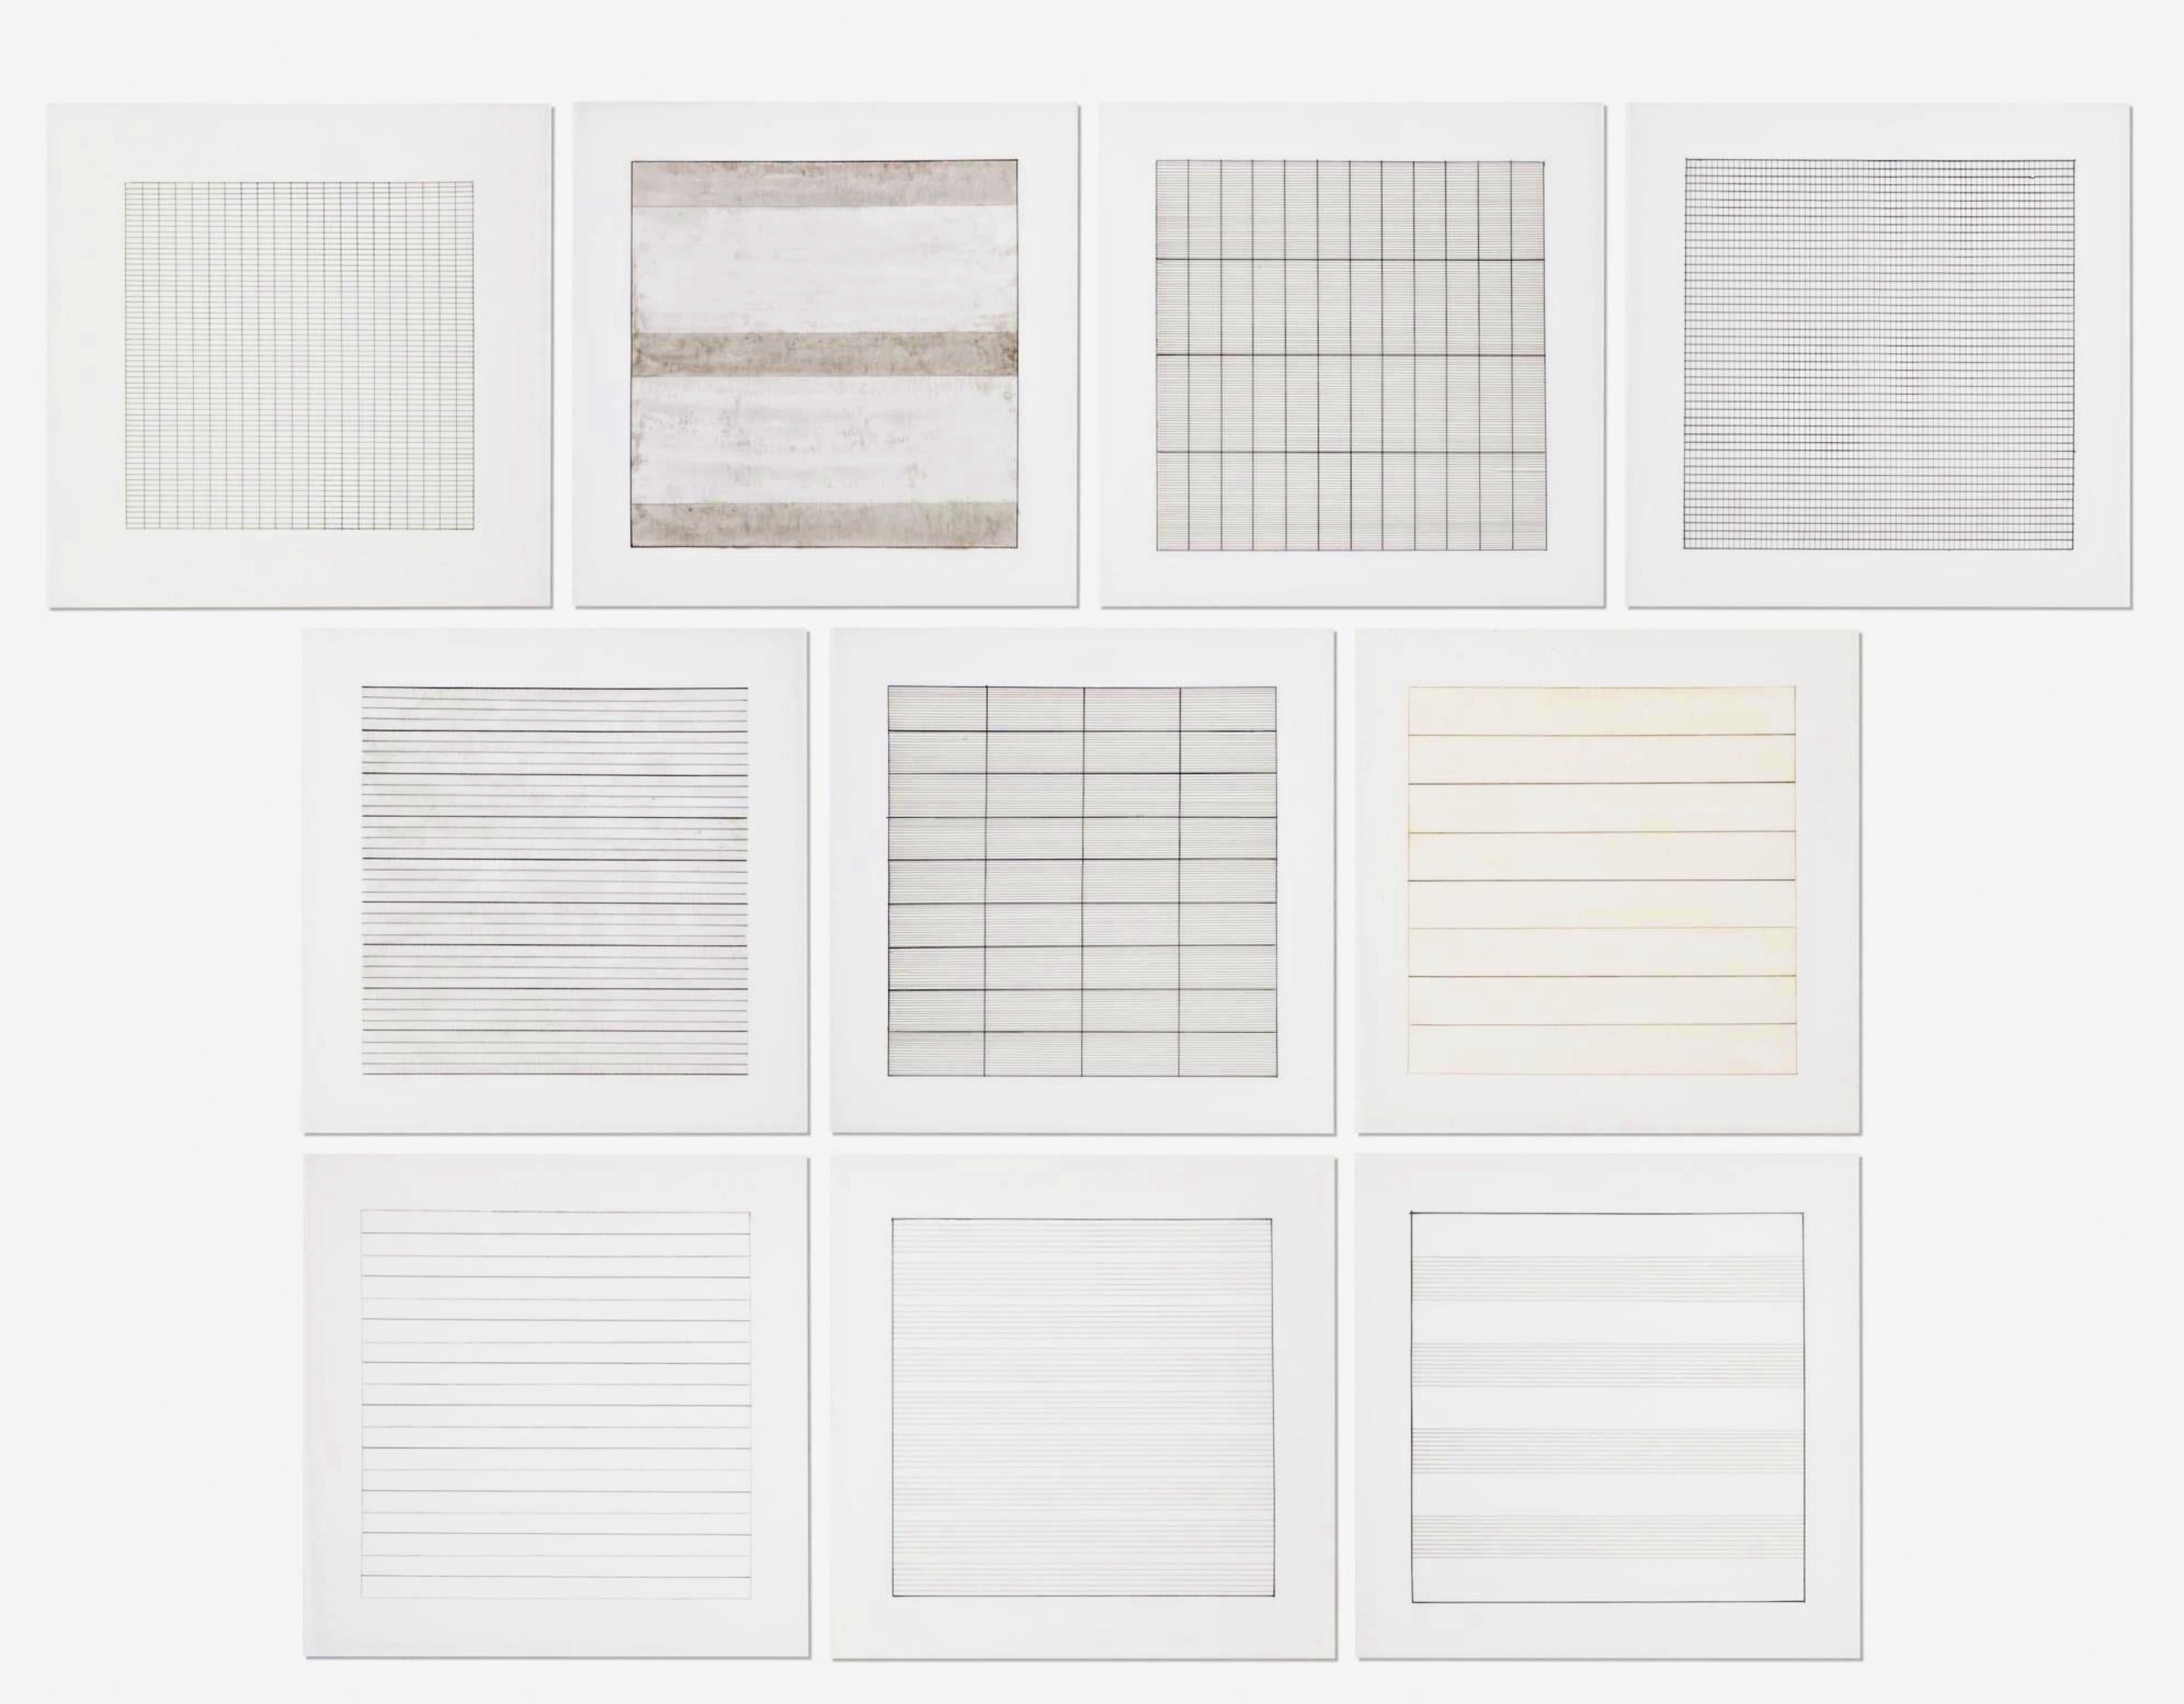 Agnes Martin Abstract Print - Paintings and Drawings: Suite of 10 Separate (Individual) lithographs on vellum 